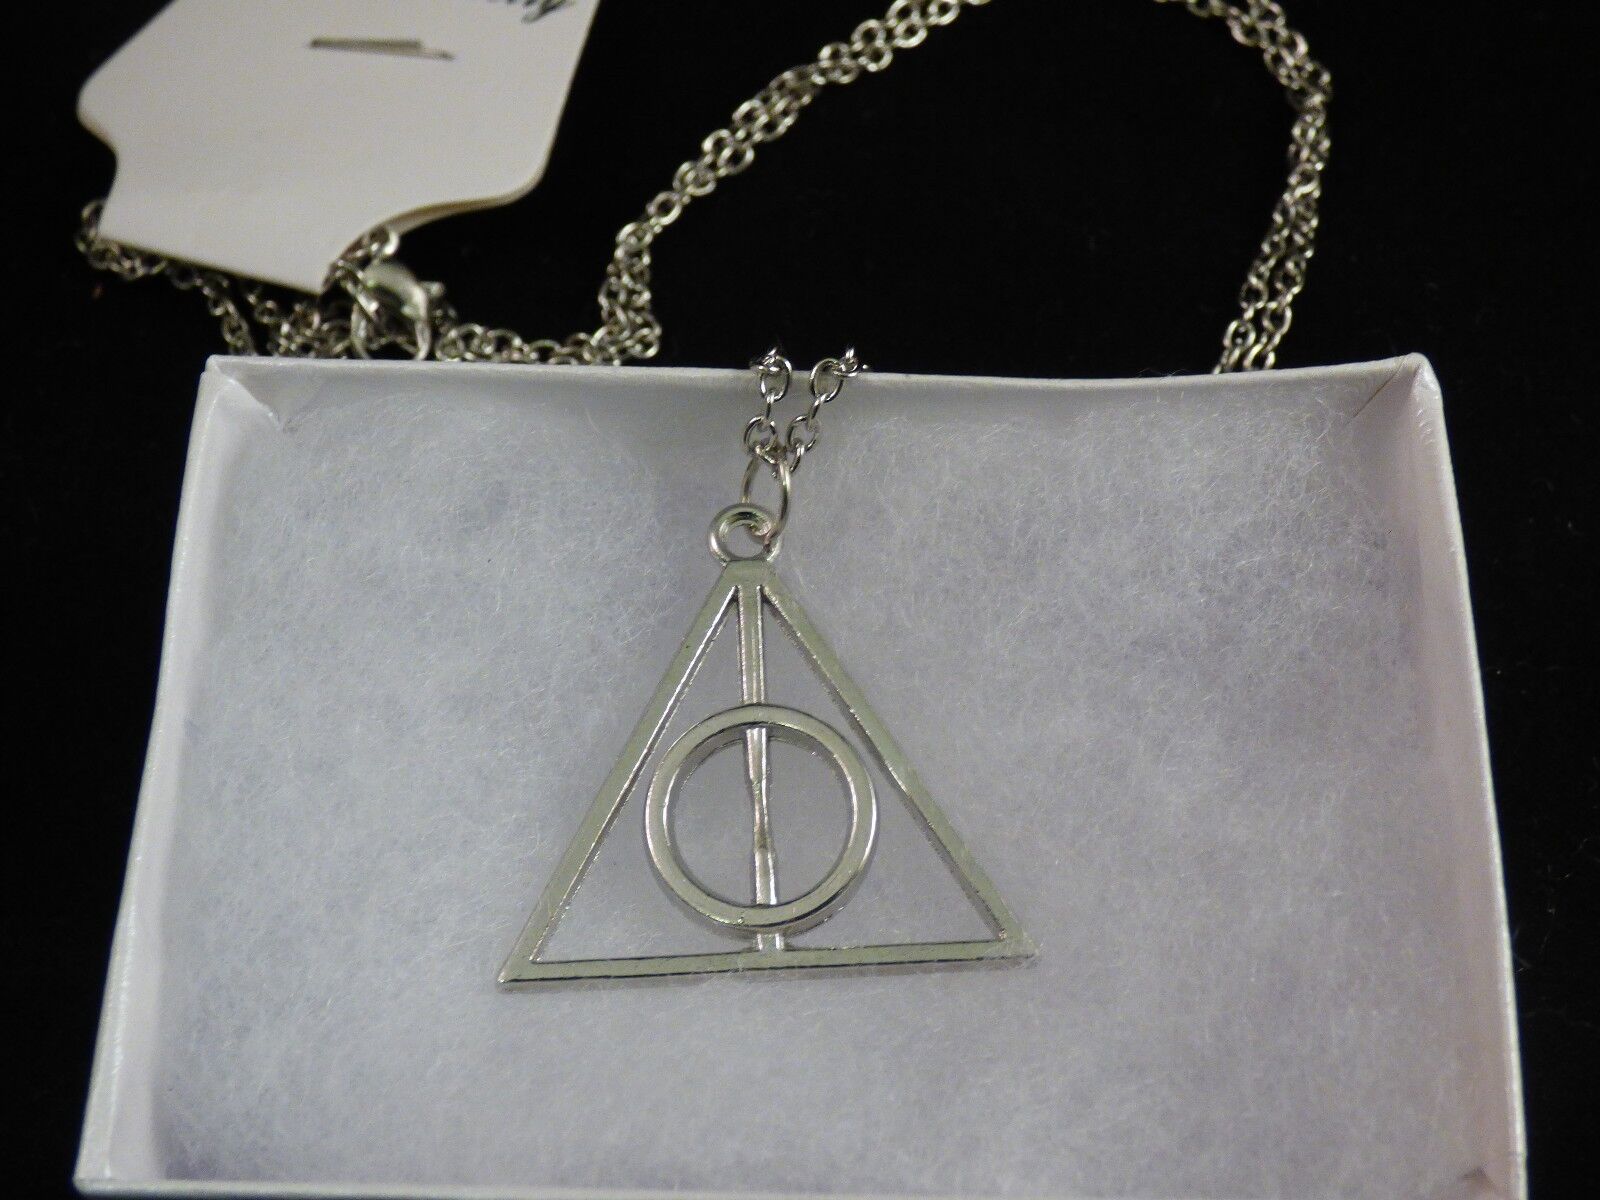 USA -  Harry Potter The Deathly Hallows Silver Charm  Pendant Necklace